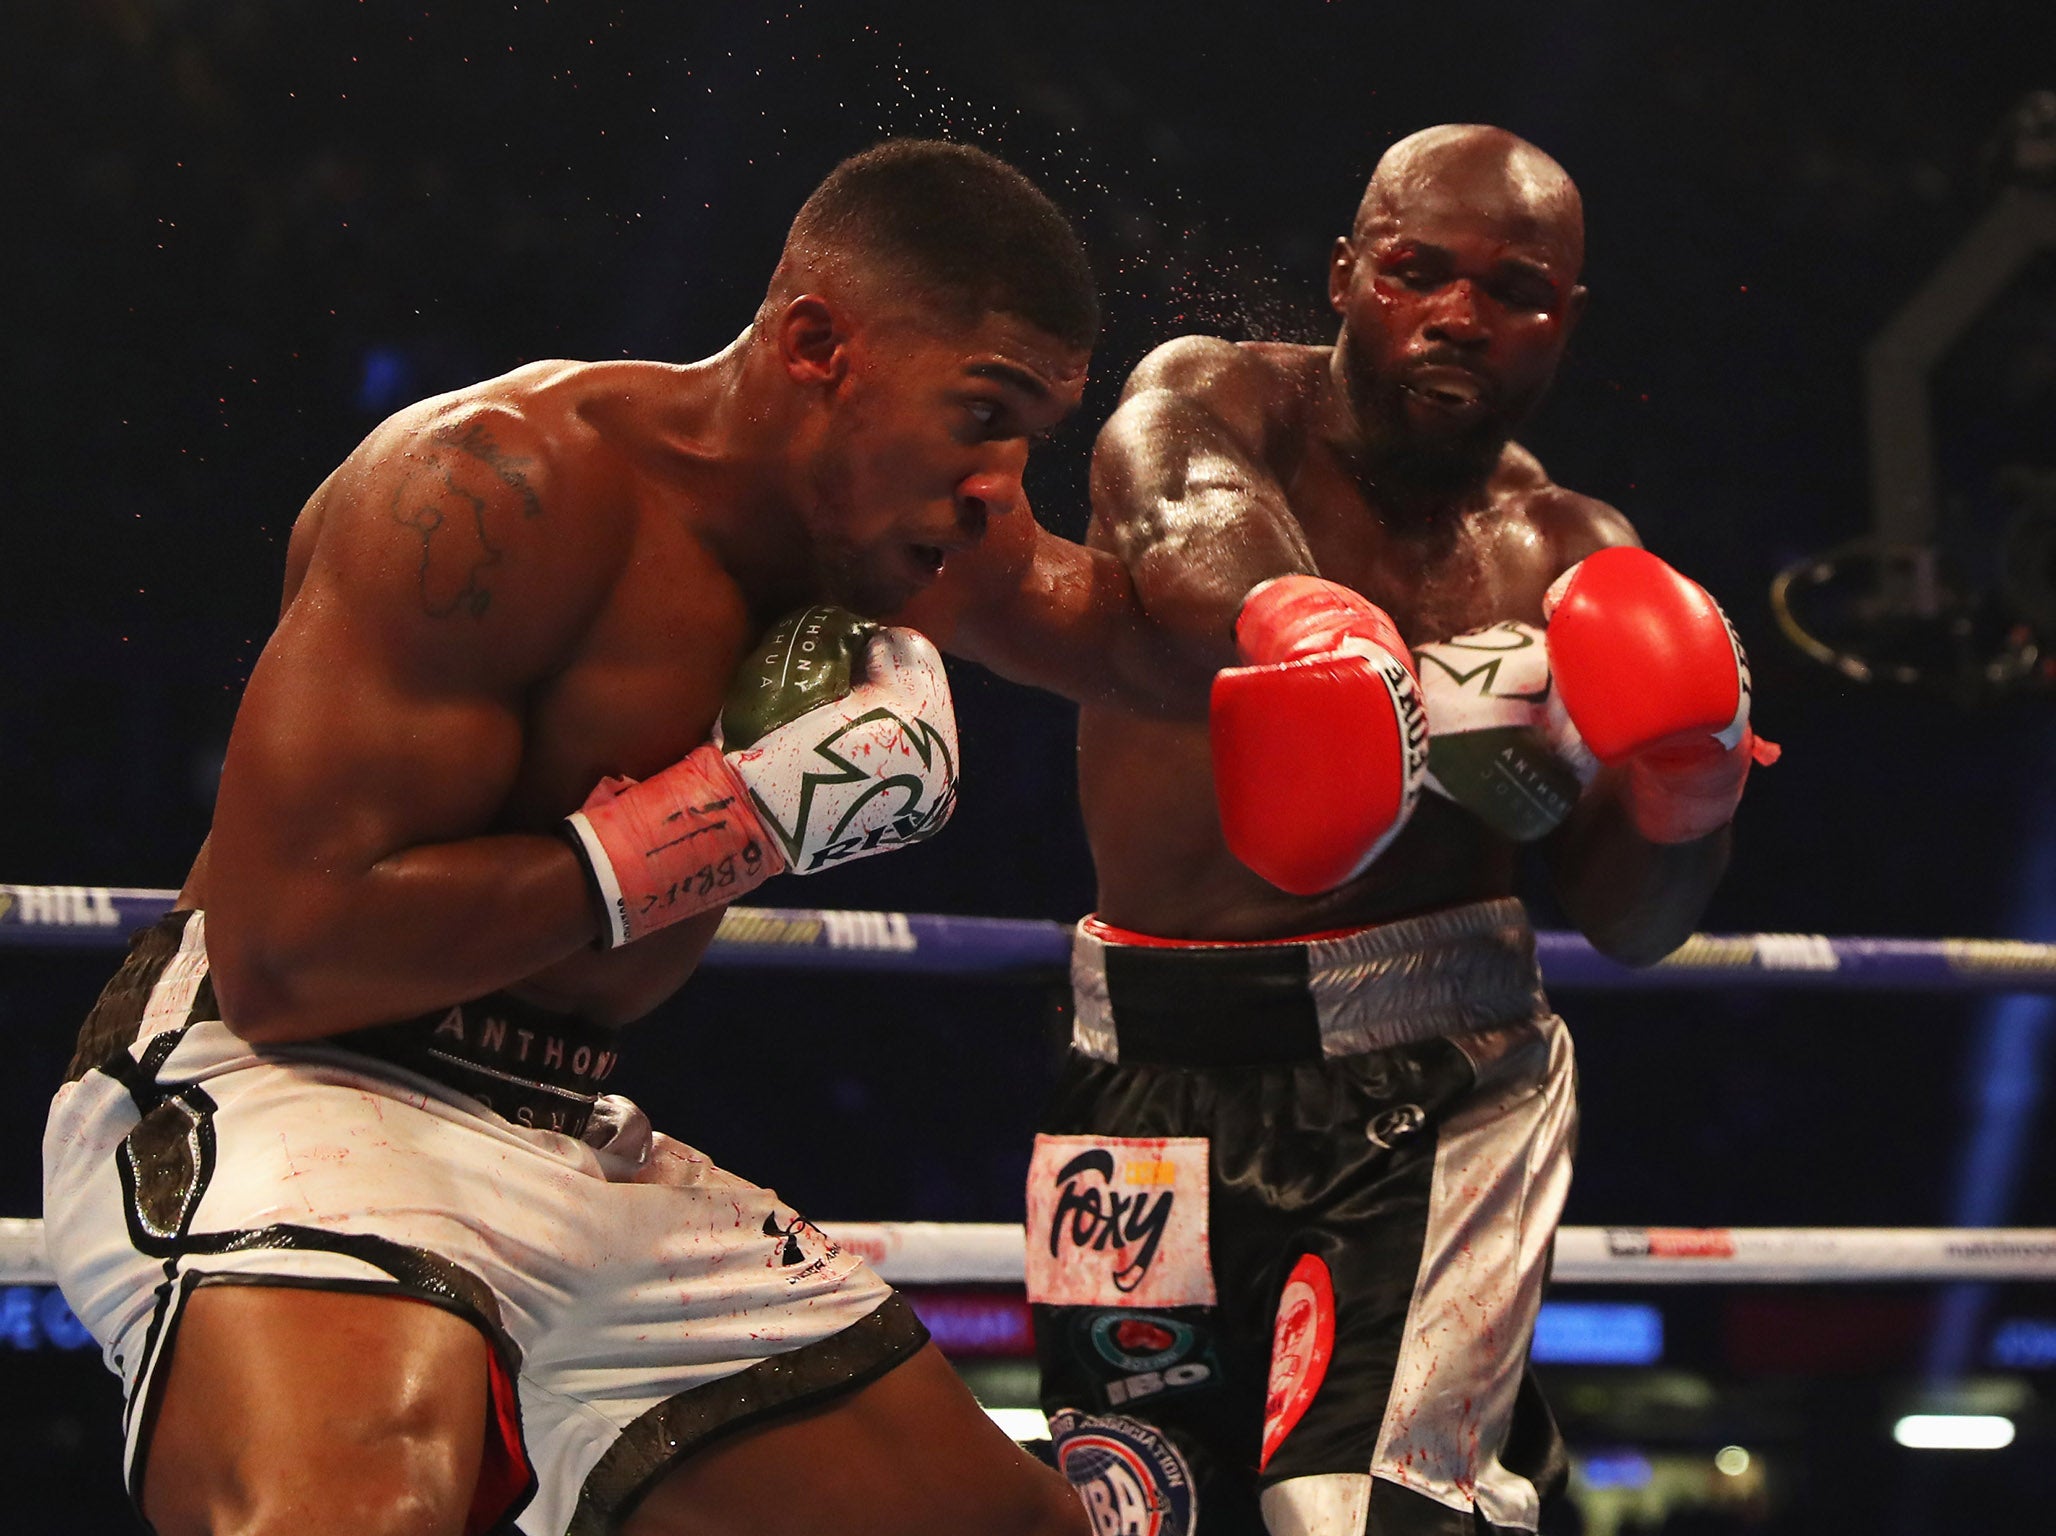 Takam was disappointed with the tenth round stoppage